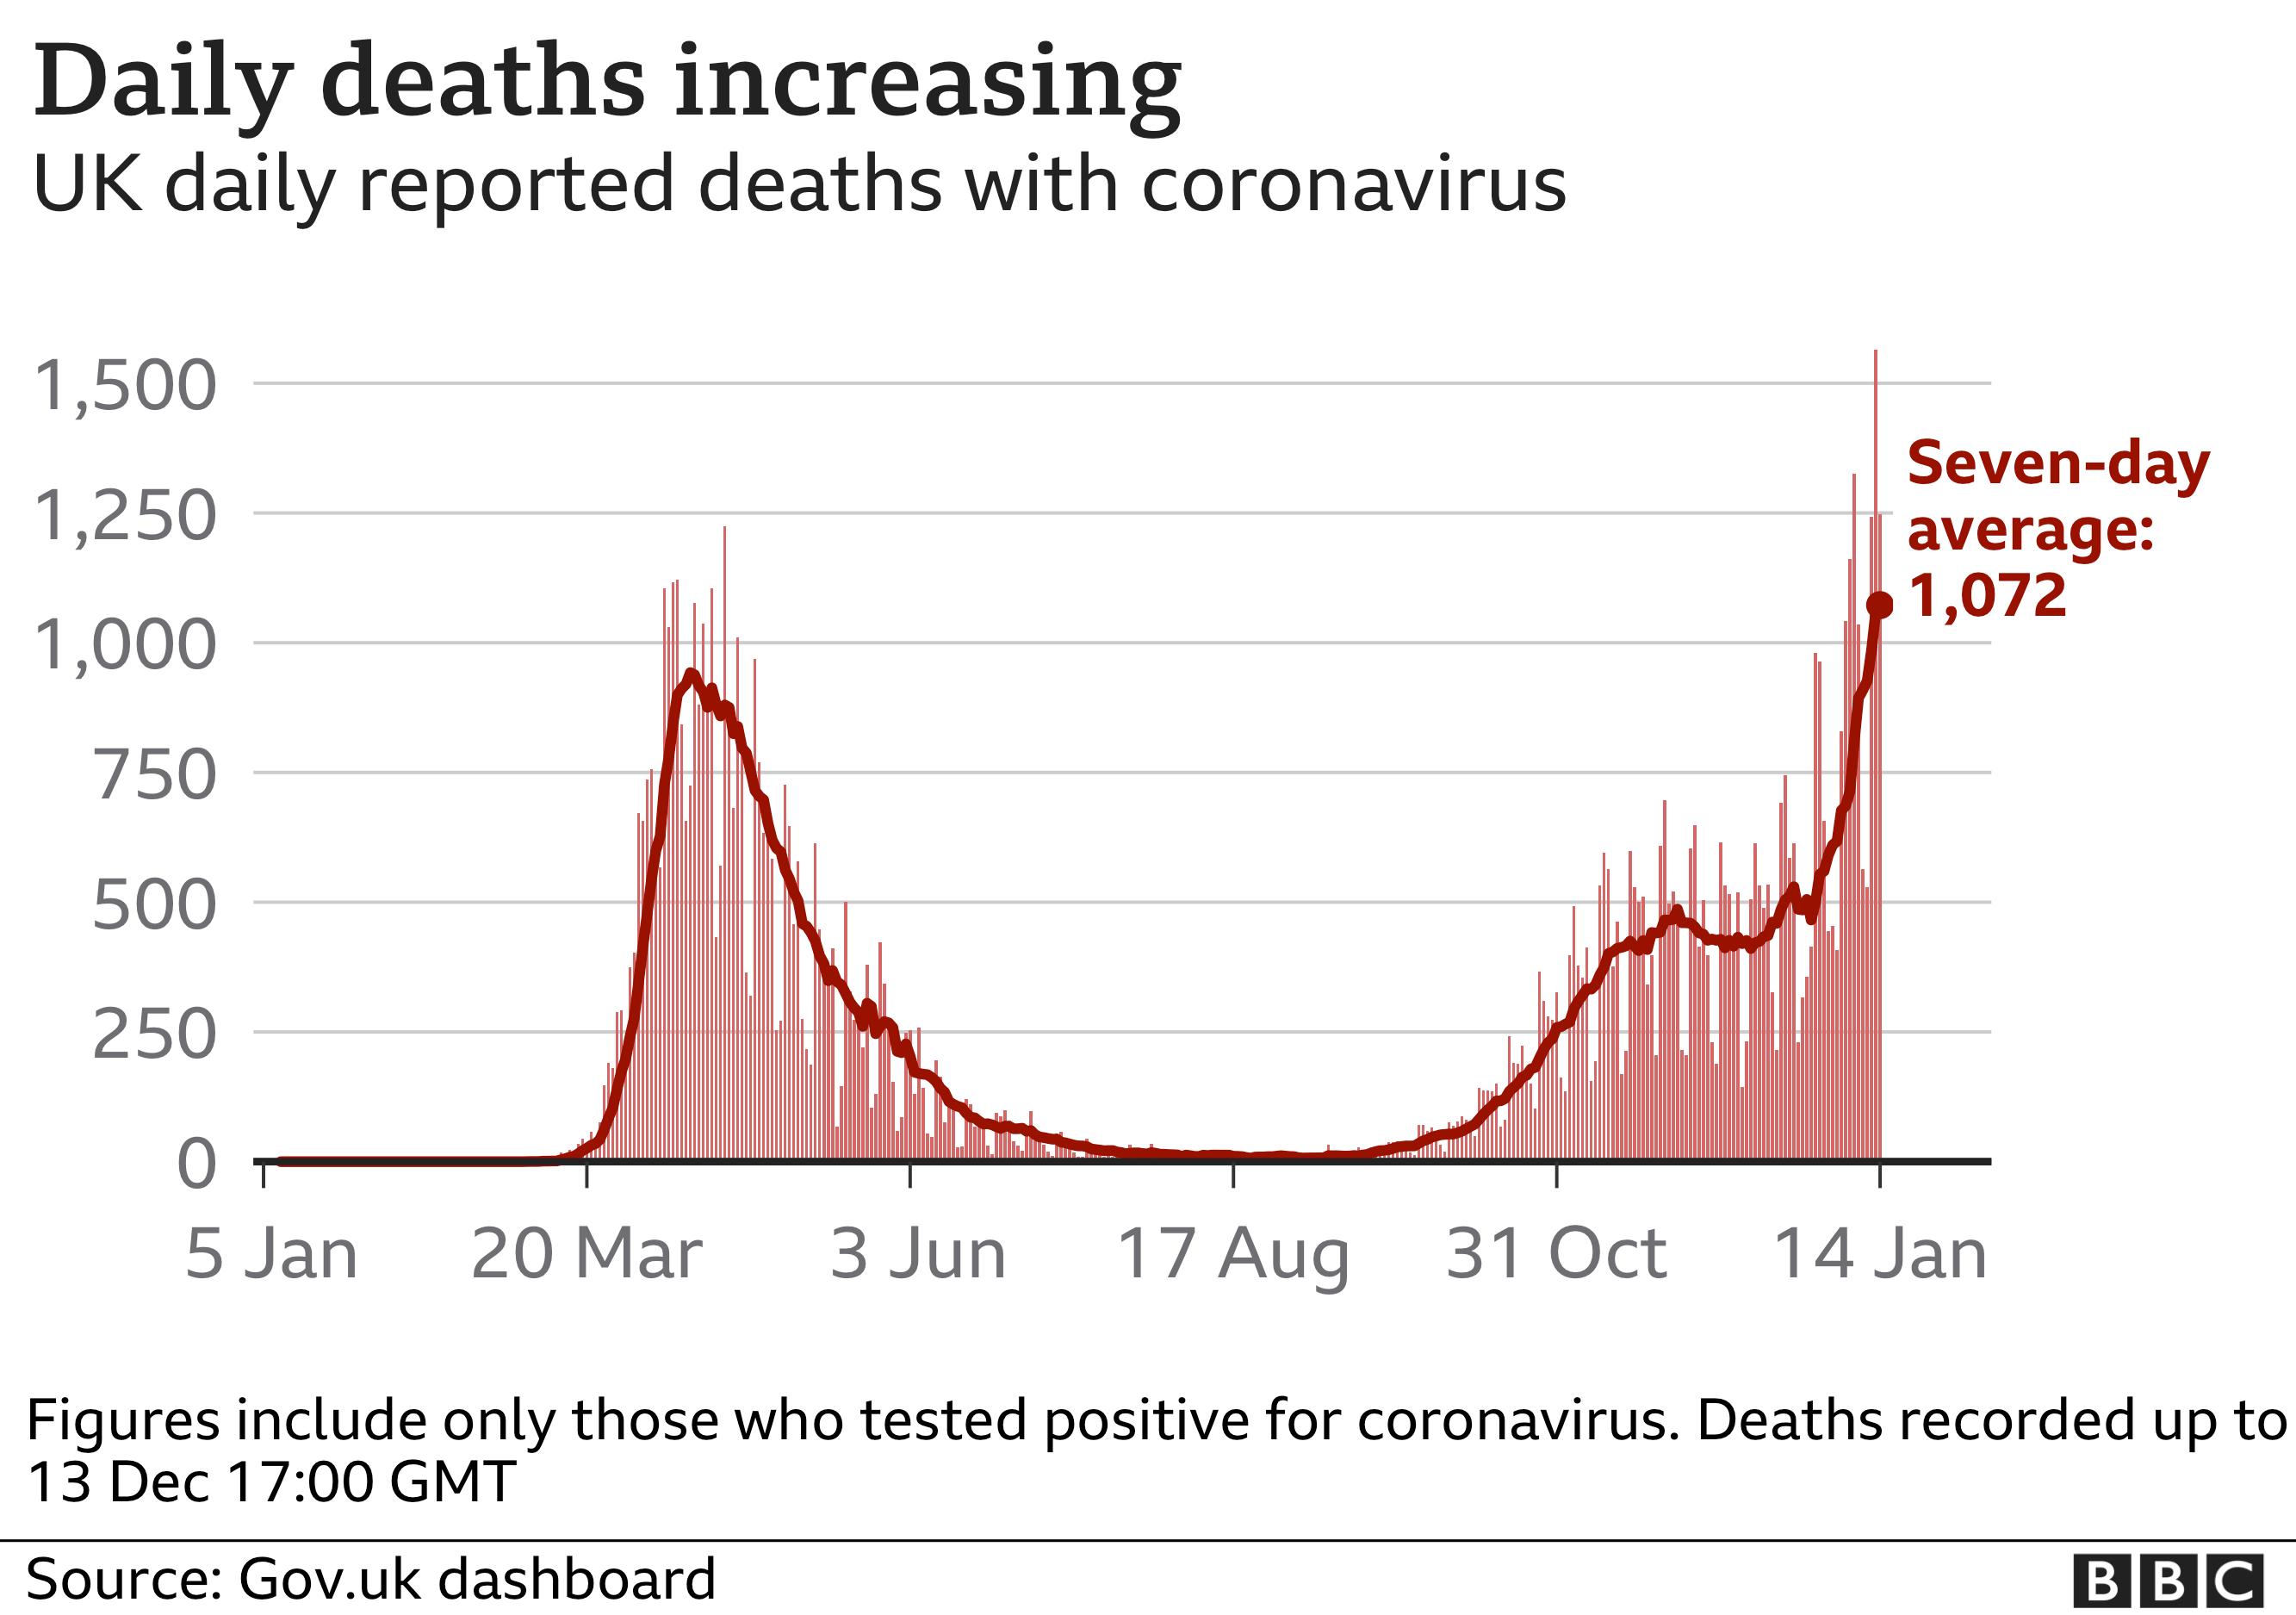 Graph showing the number of daily deaths in the UK